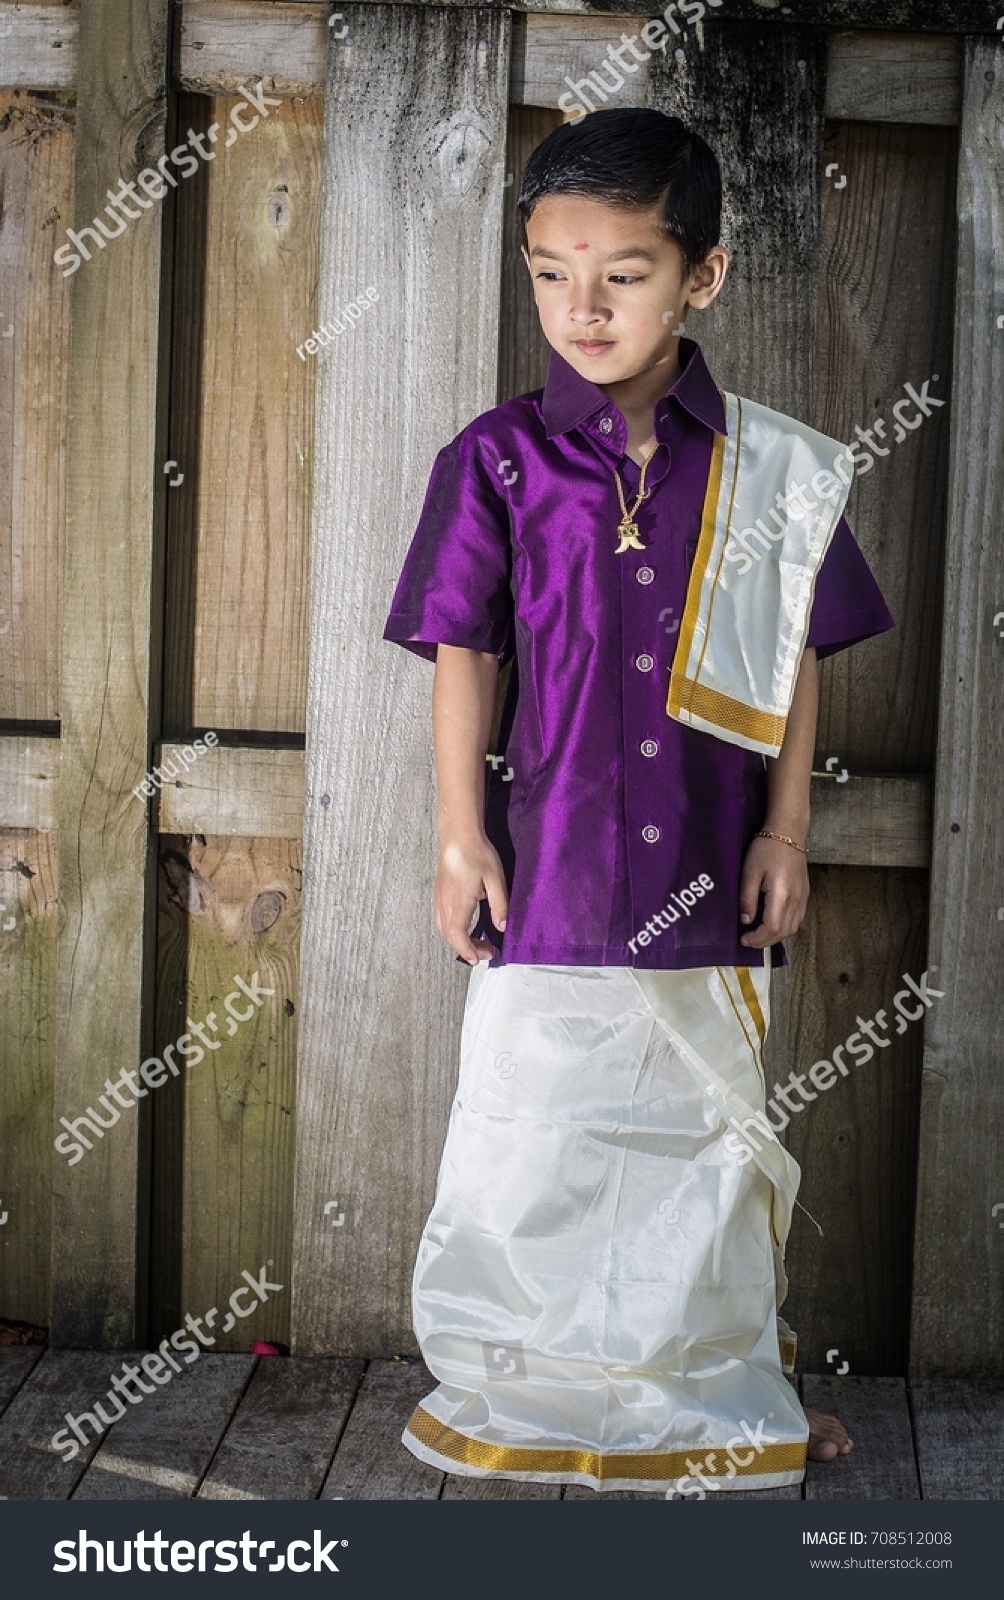 baby boy south indian dress